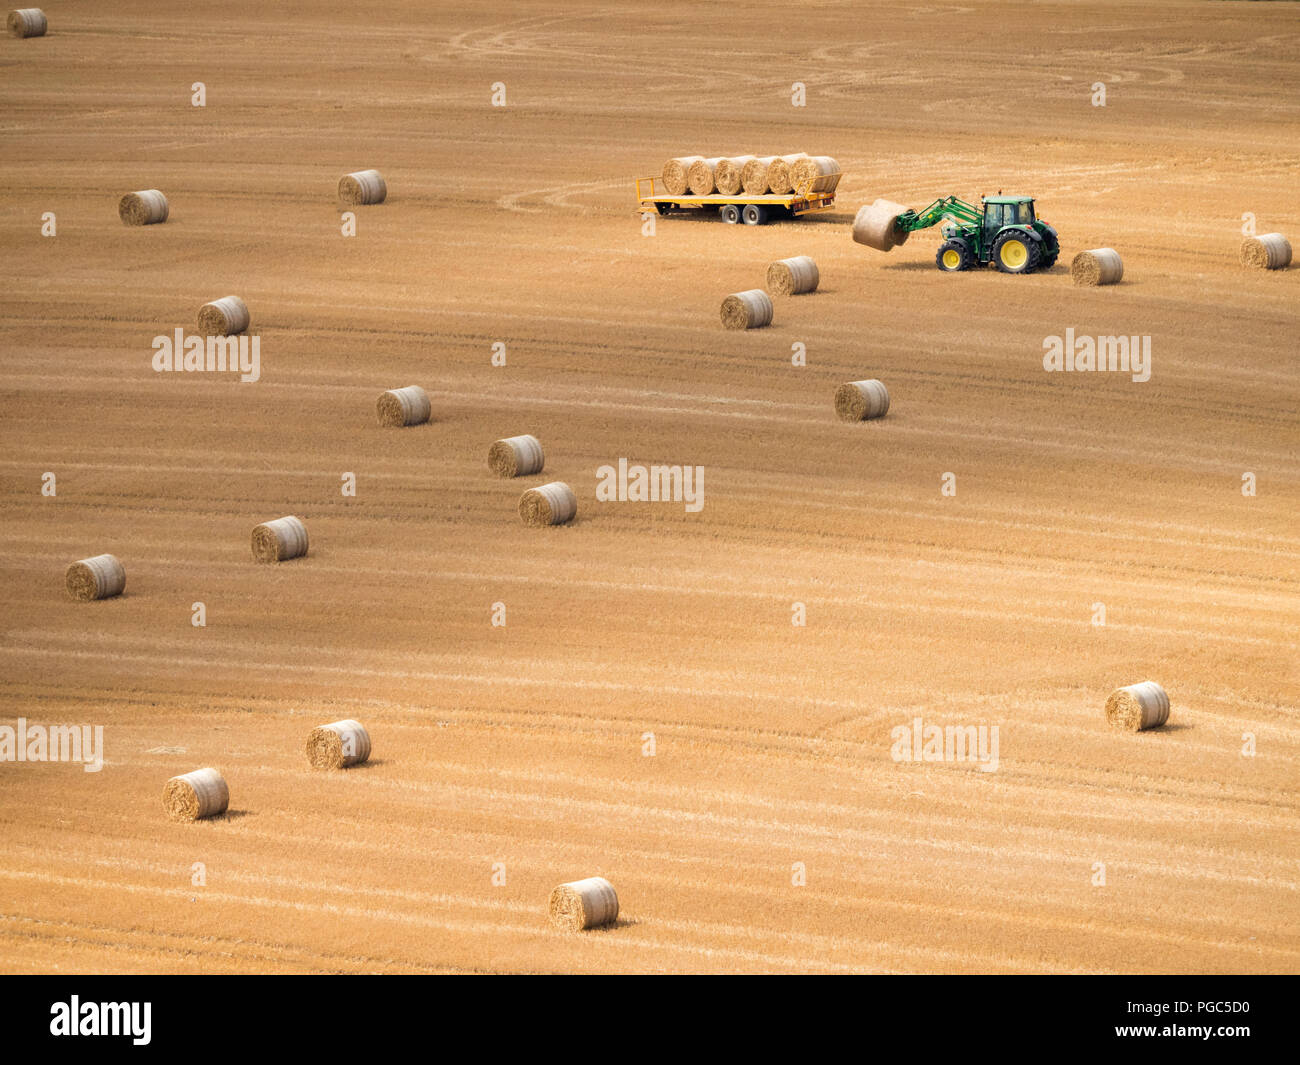 Green tractor with fork collecting round hay bales in a field and stacking on a trailer, near Whipsnade, Bedfordshire, England Stock Photo